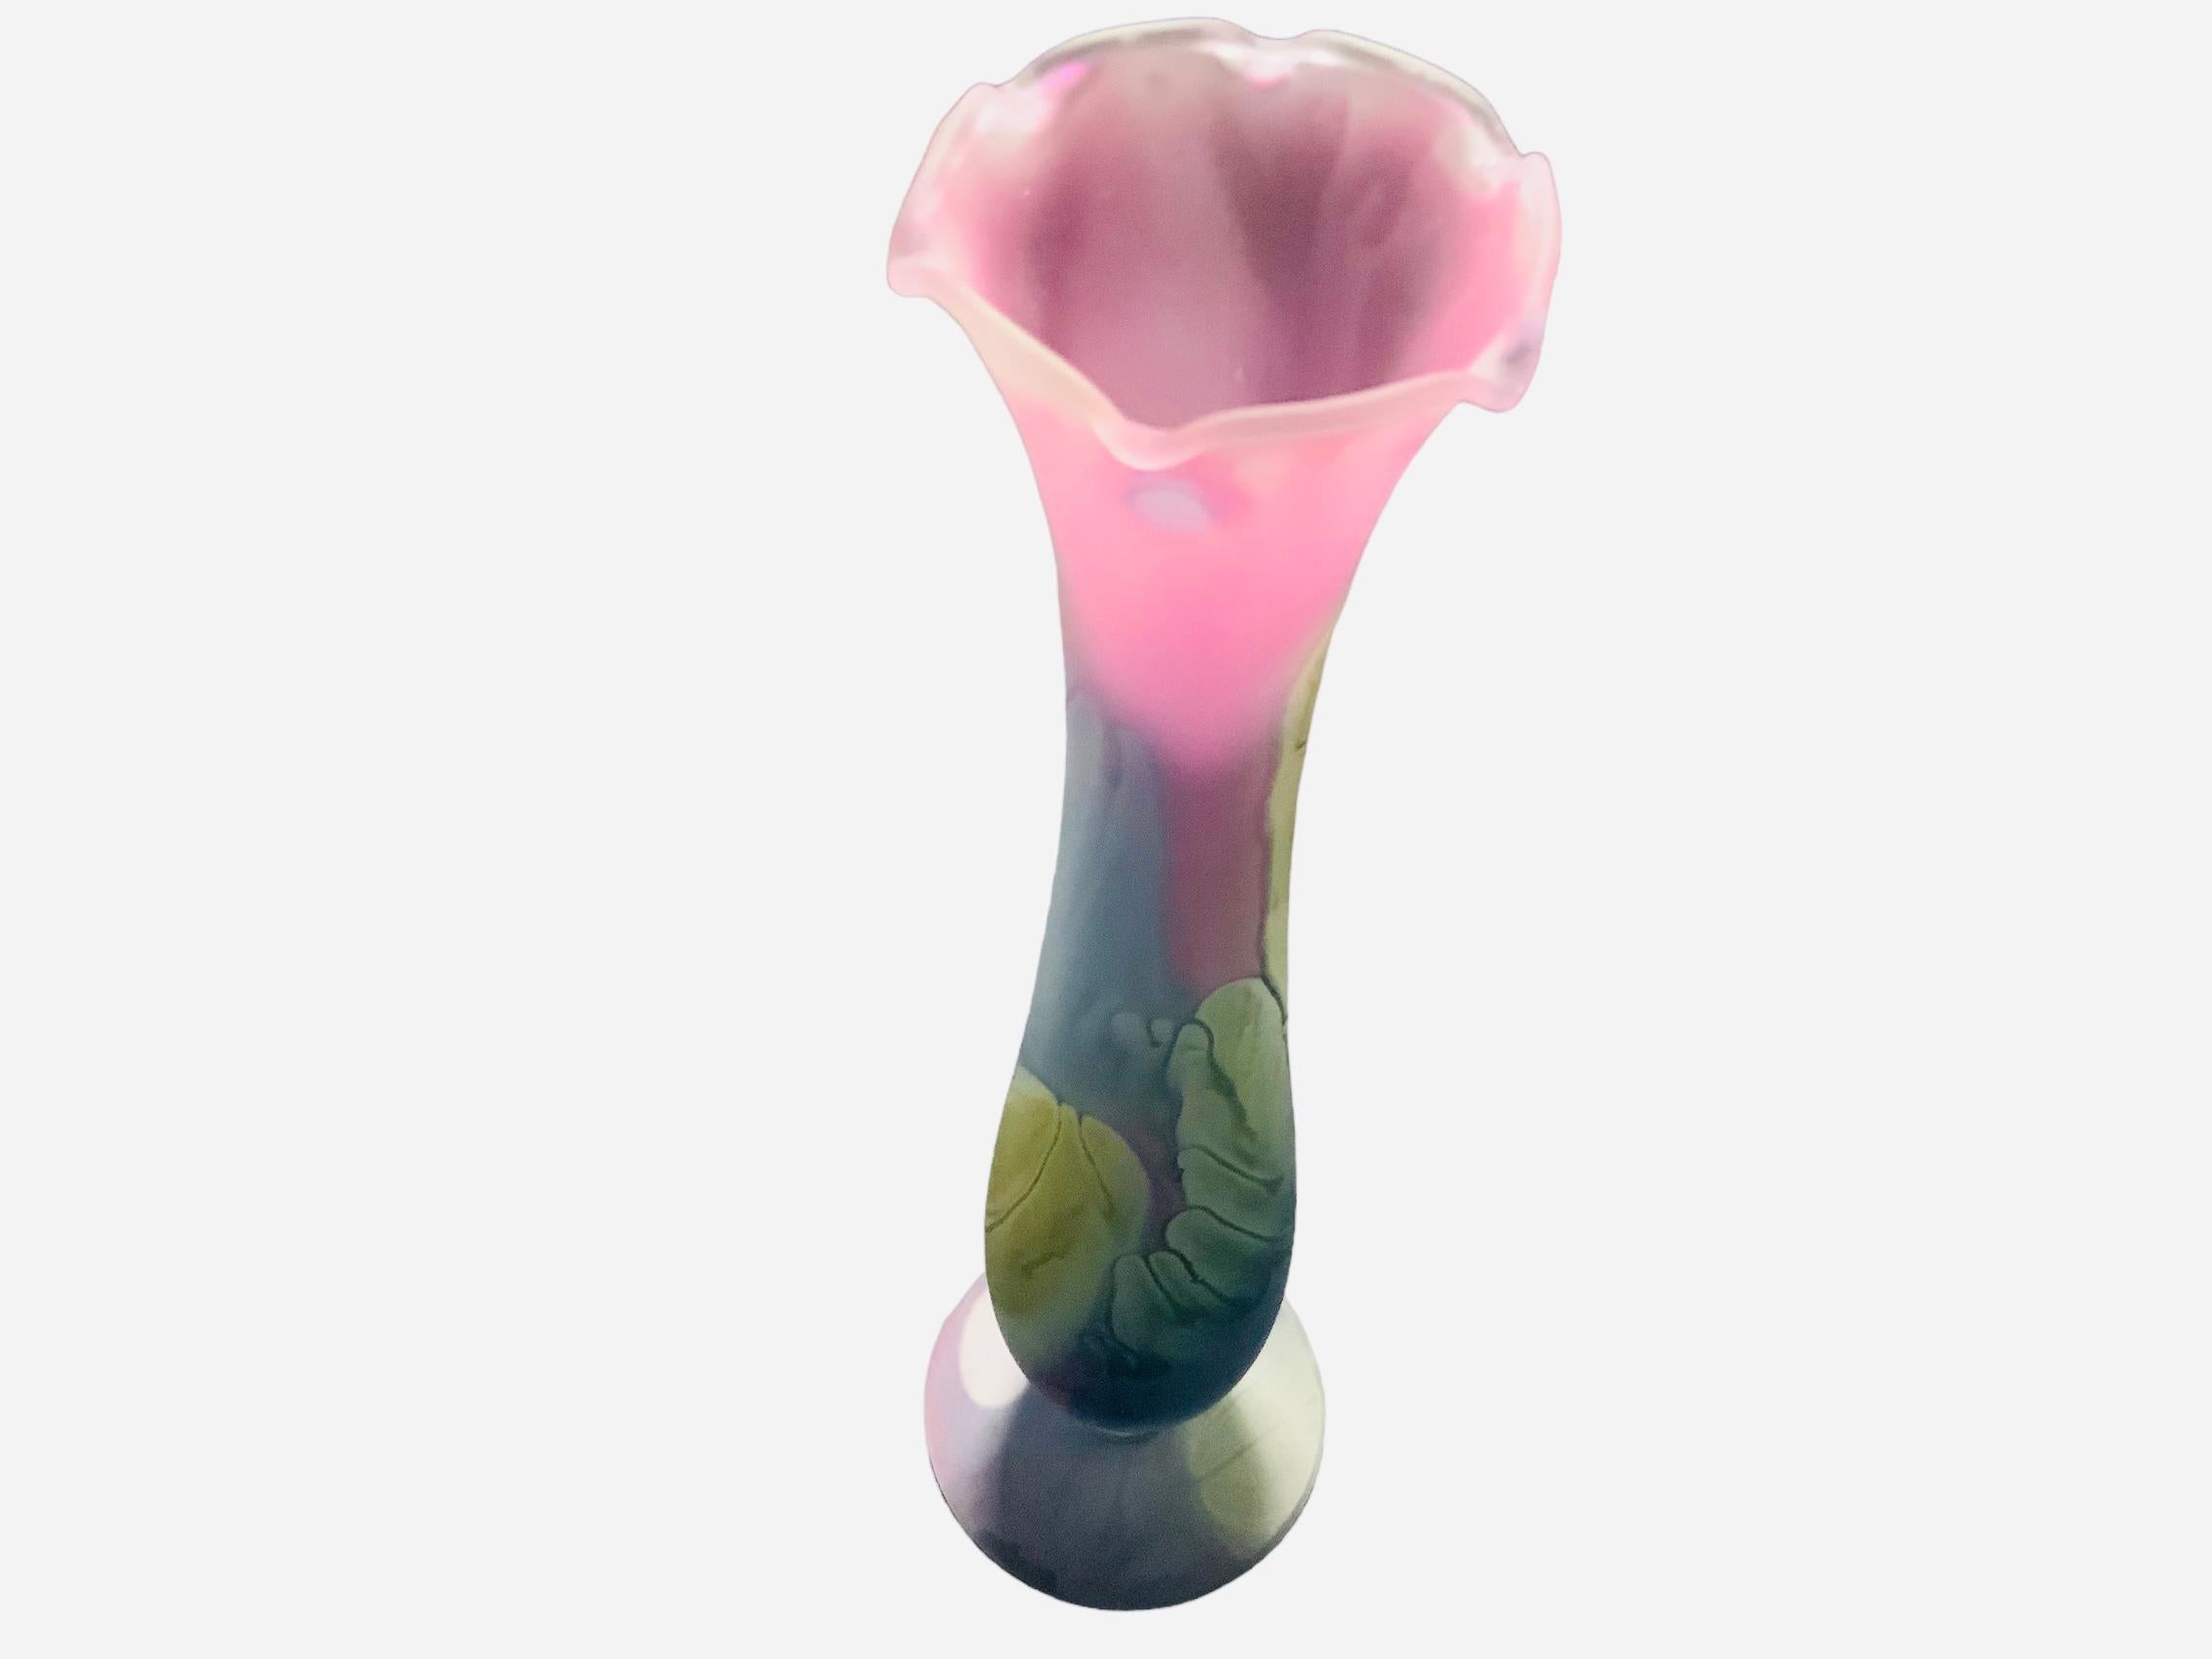 This is a Nouveau Art Rueven Glass Flower Bud Vase. It depicts an elongated pink, green-yellow, and grey blue amphora shaped bud vase with ruffles upper border. Below the base, it is the Nouveau Art Glass, Reuben Glass label.